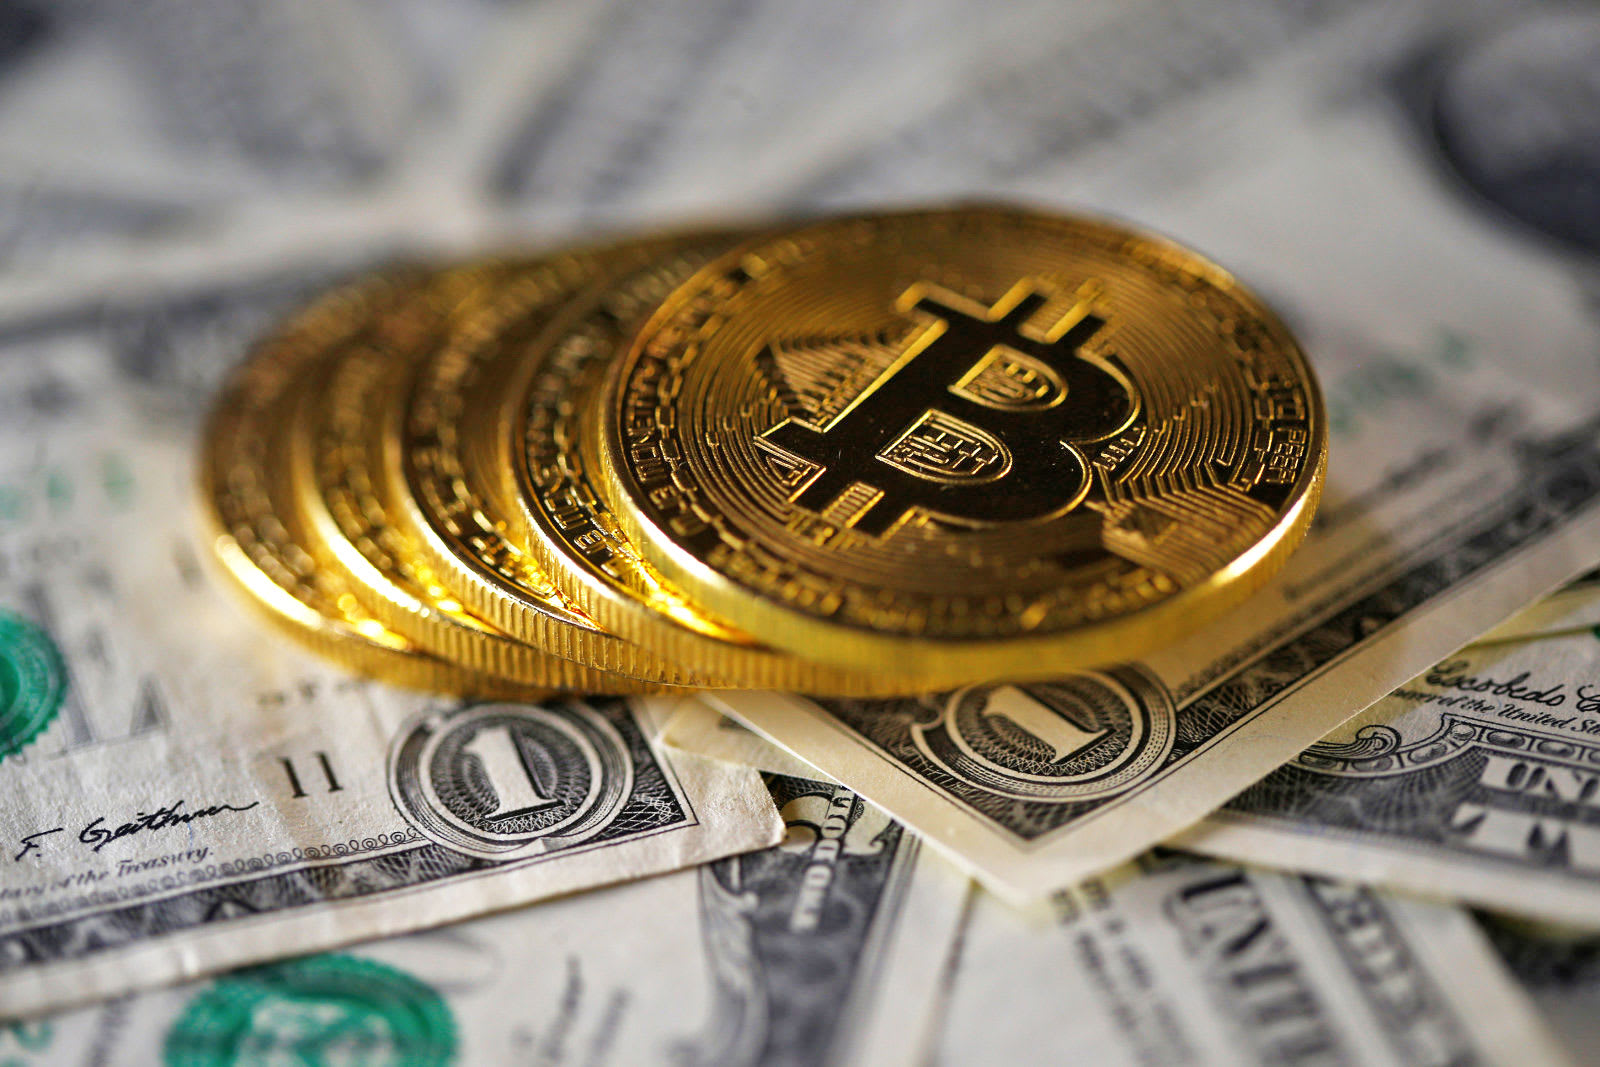 Square Tests Buying And Selling Bitcoin Inside Its Payment App - 